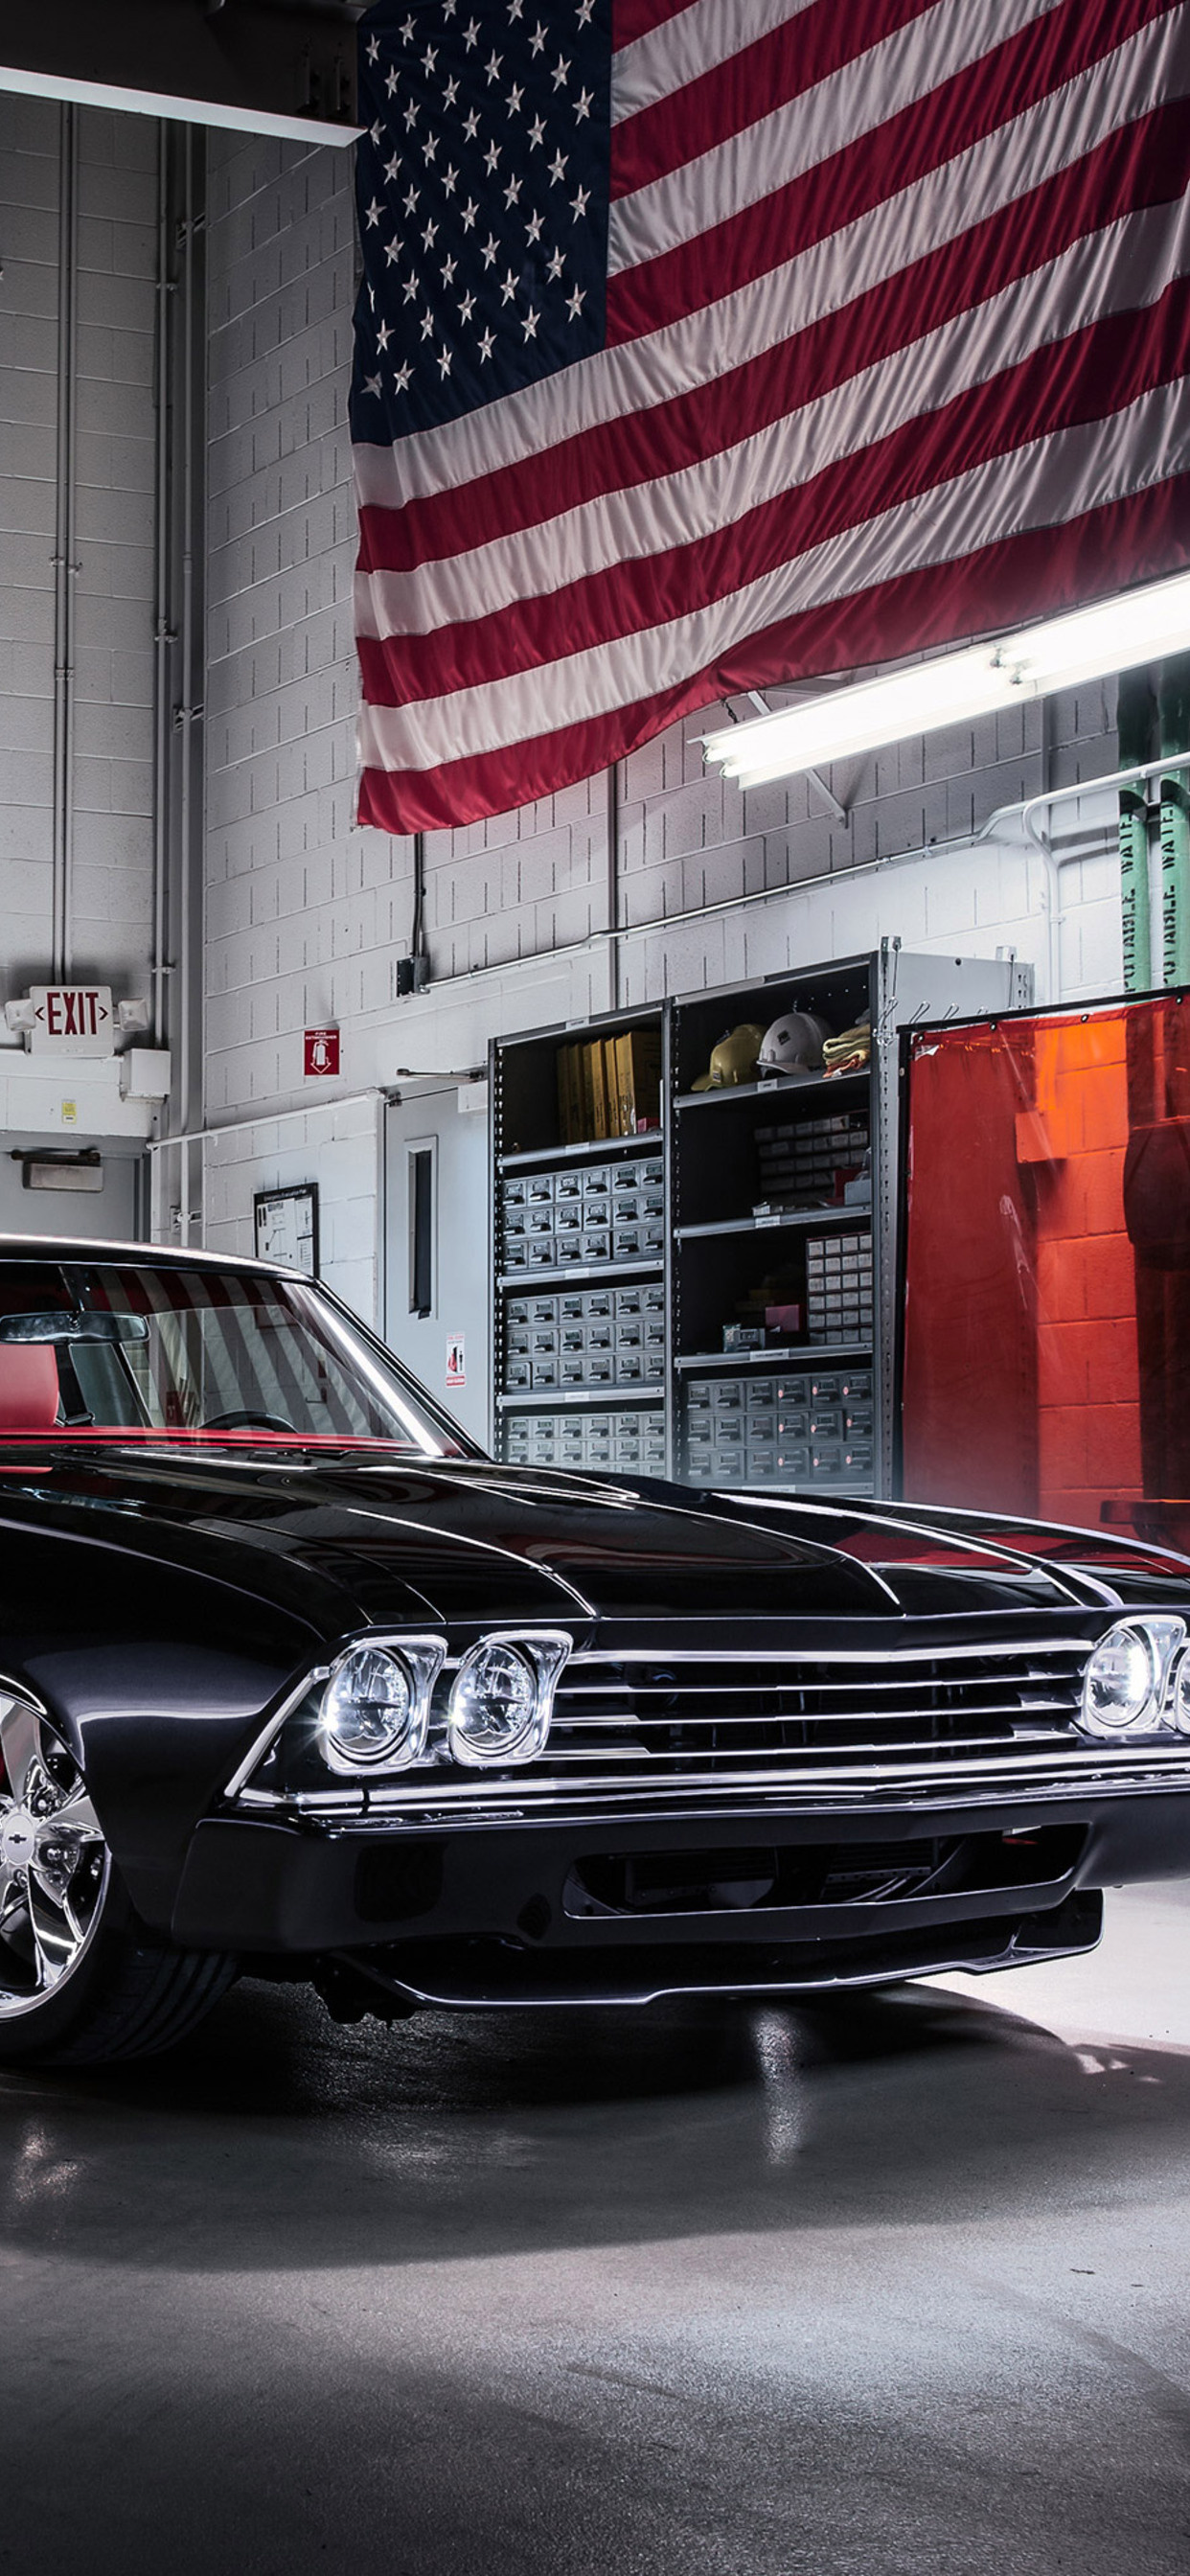 Chevelle drive legacy, Muscle car craftsmanship, Historic Chevy marque, Performance vehicle, Iconic design, 1250x2690 HD Phone